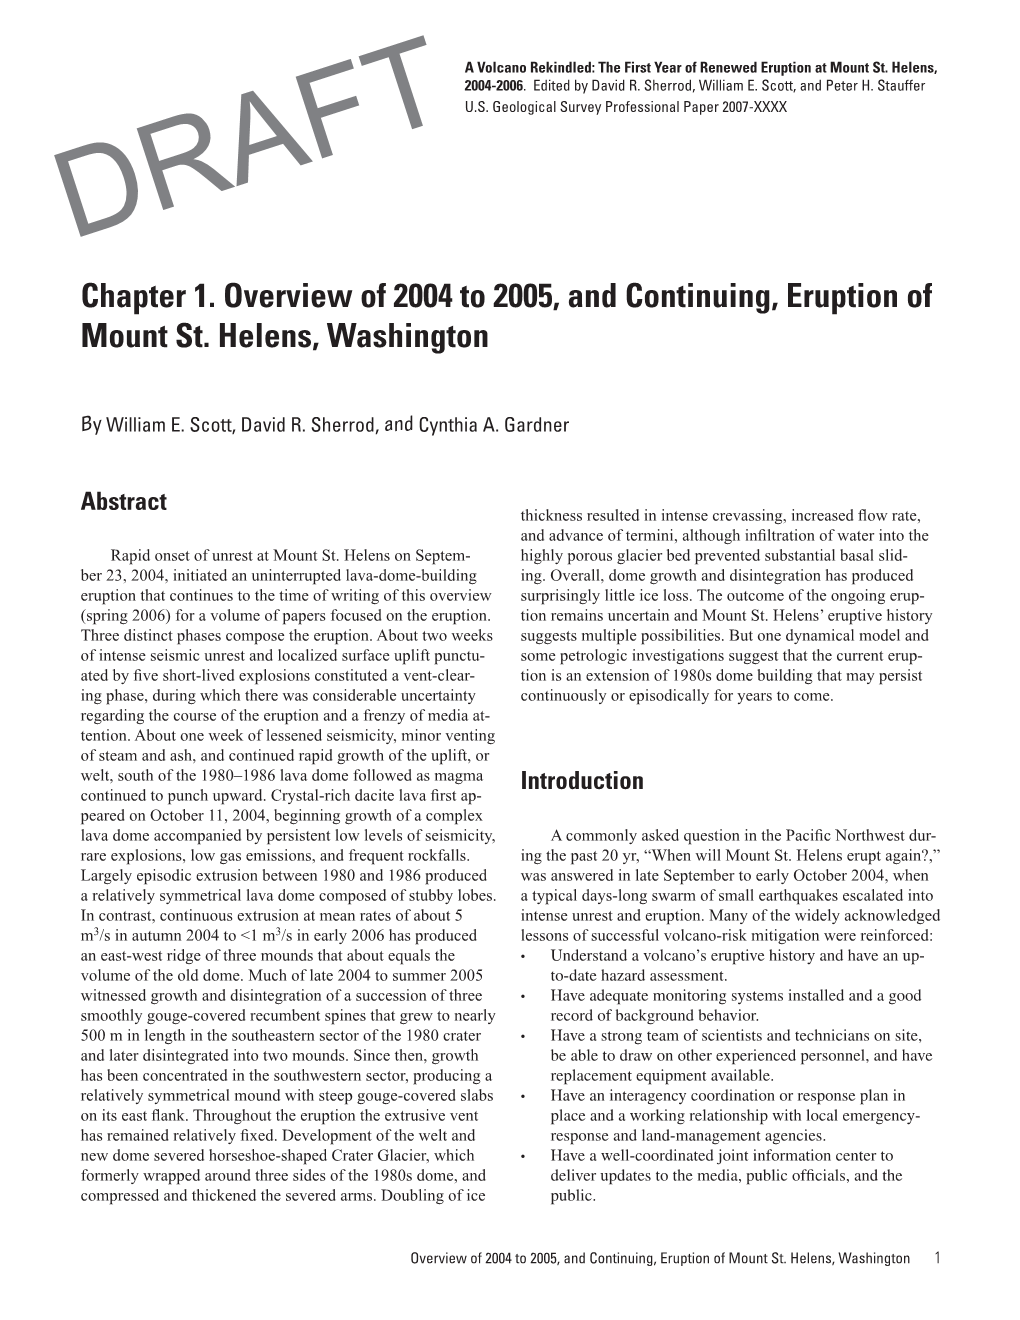 Chapter 1. Overview of 2004 to 2005, and Continuing, Eruption of Mount St. Helens, Washington